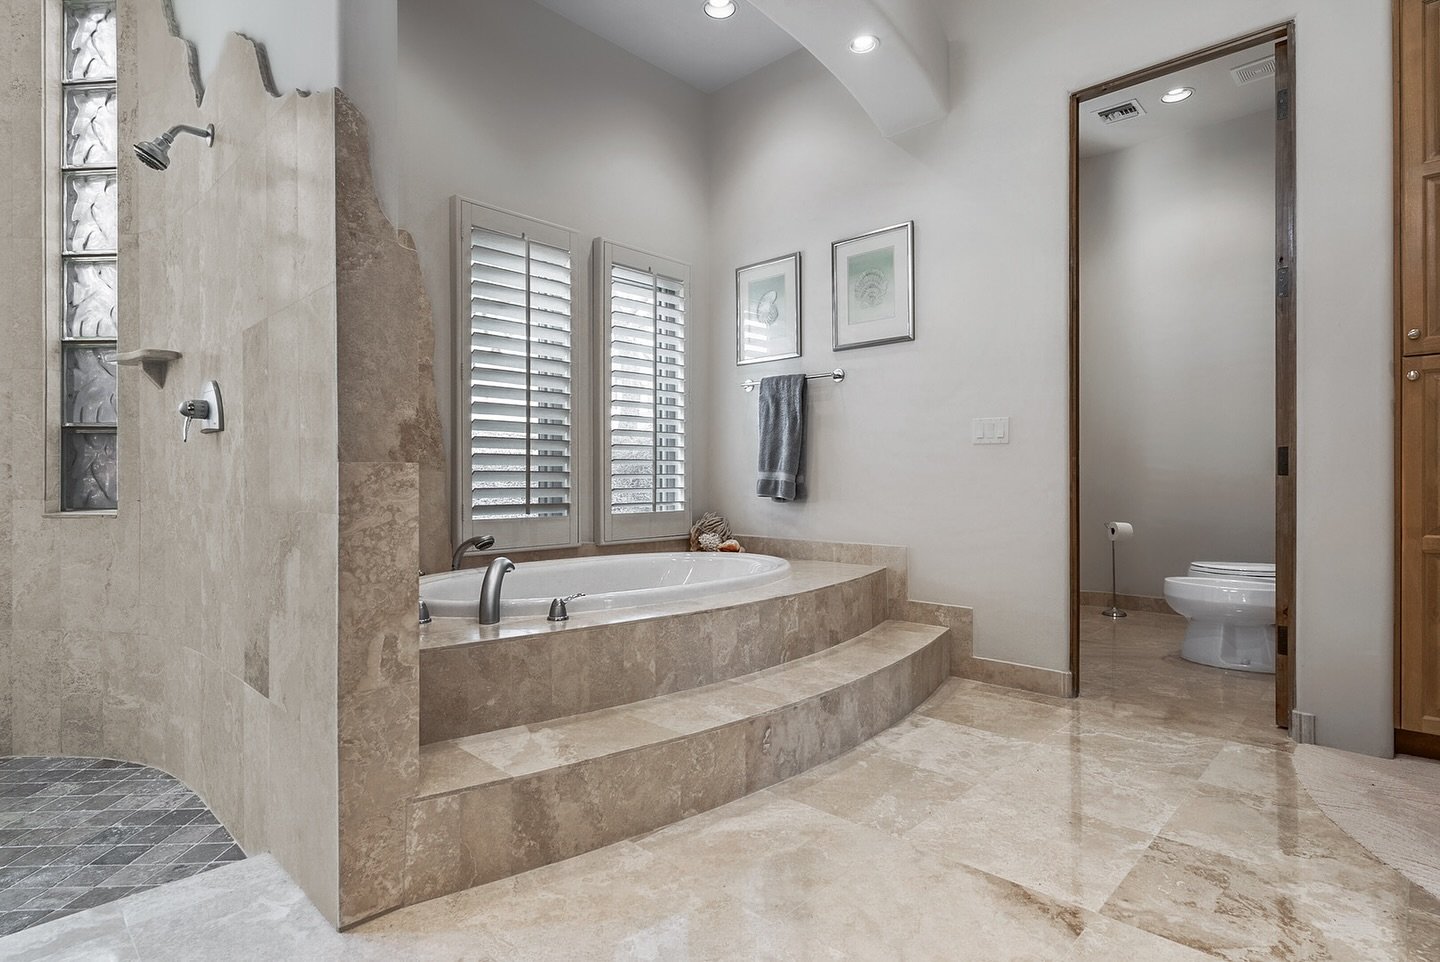 It&rsquo;s finally the weekend! Take some time to unwind and enjoy every moment. You&rsquo;ve earned it! 🌞😊 #WeekendBliss #relaxandrecharge 

#dreamhouse #luxuryliving #classyinterior #modernhomedesign #bathroomideas #mplsphotographer #phoenixphoto